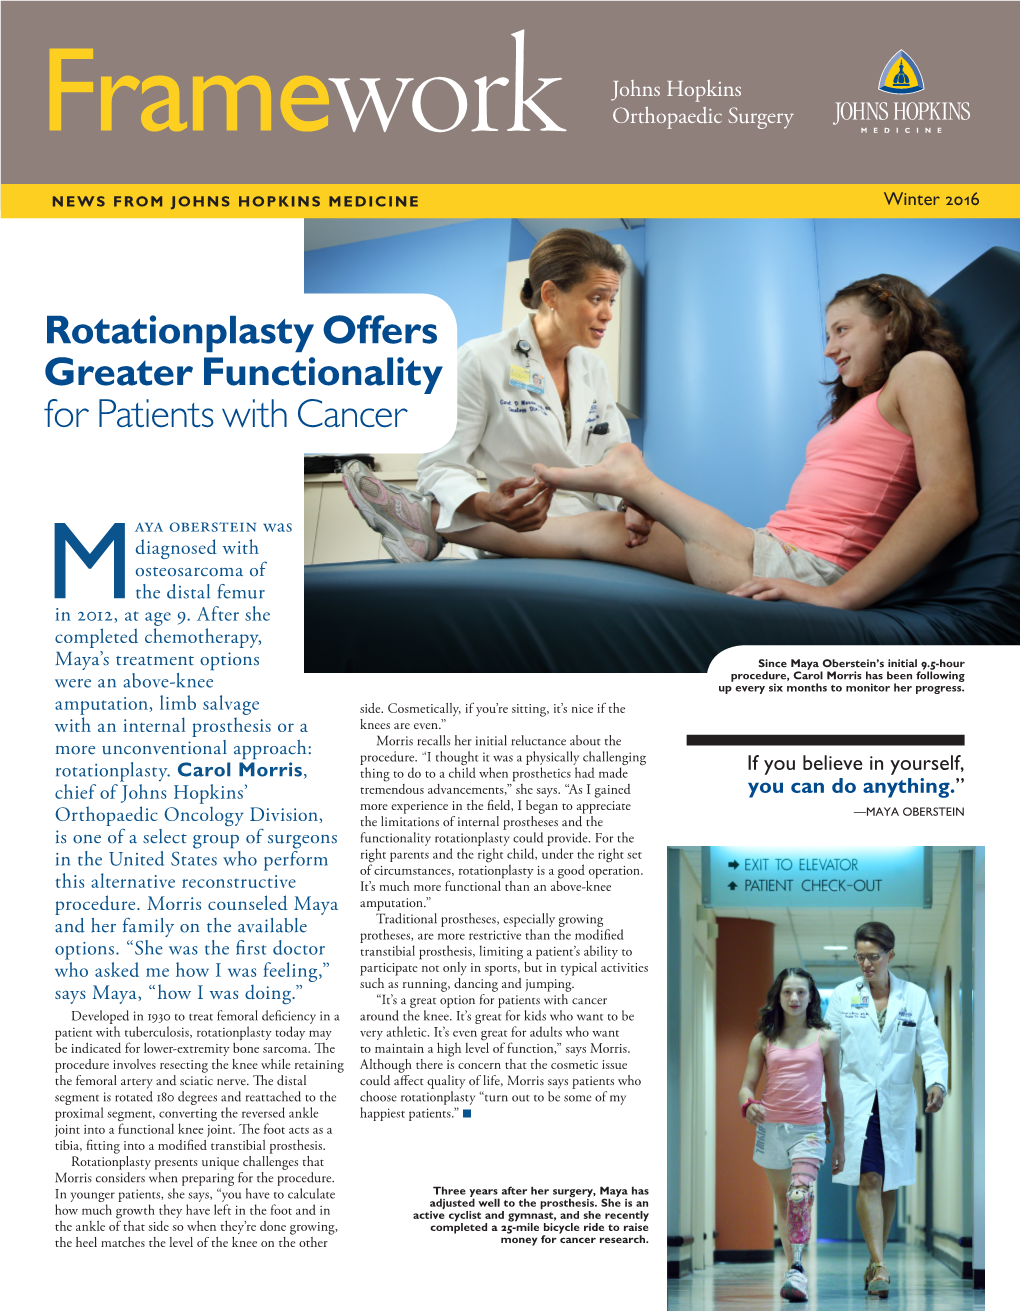 Rotationplasty Offers Greater Functionality for Patients with Cancer